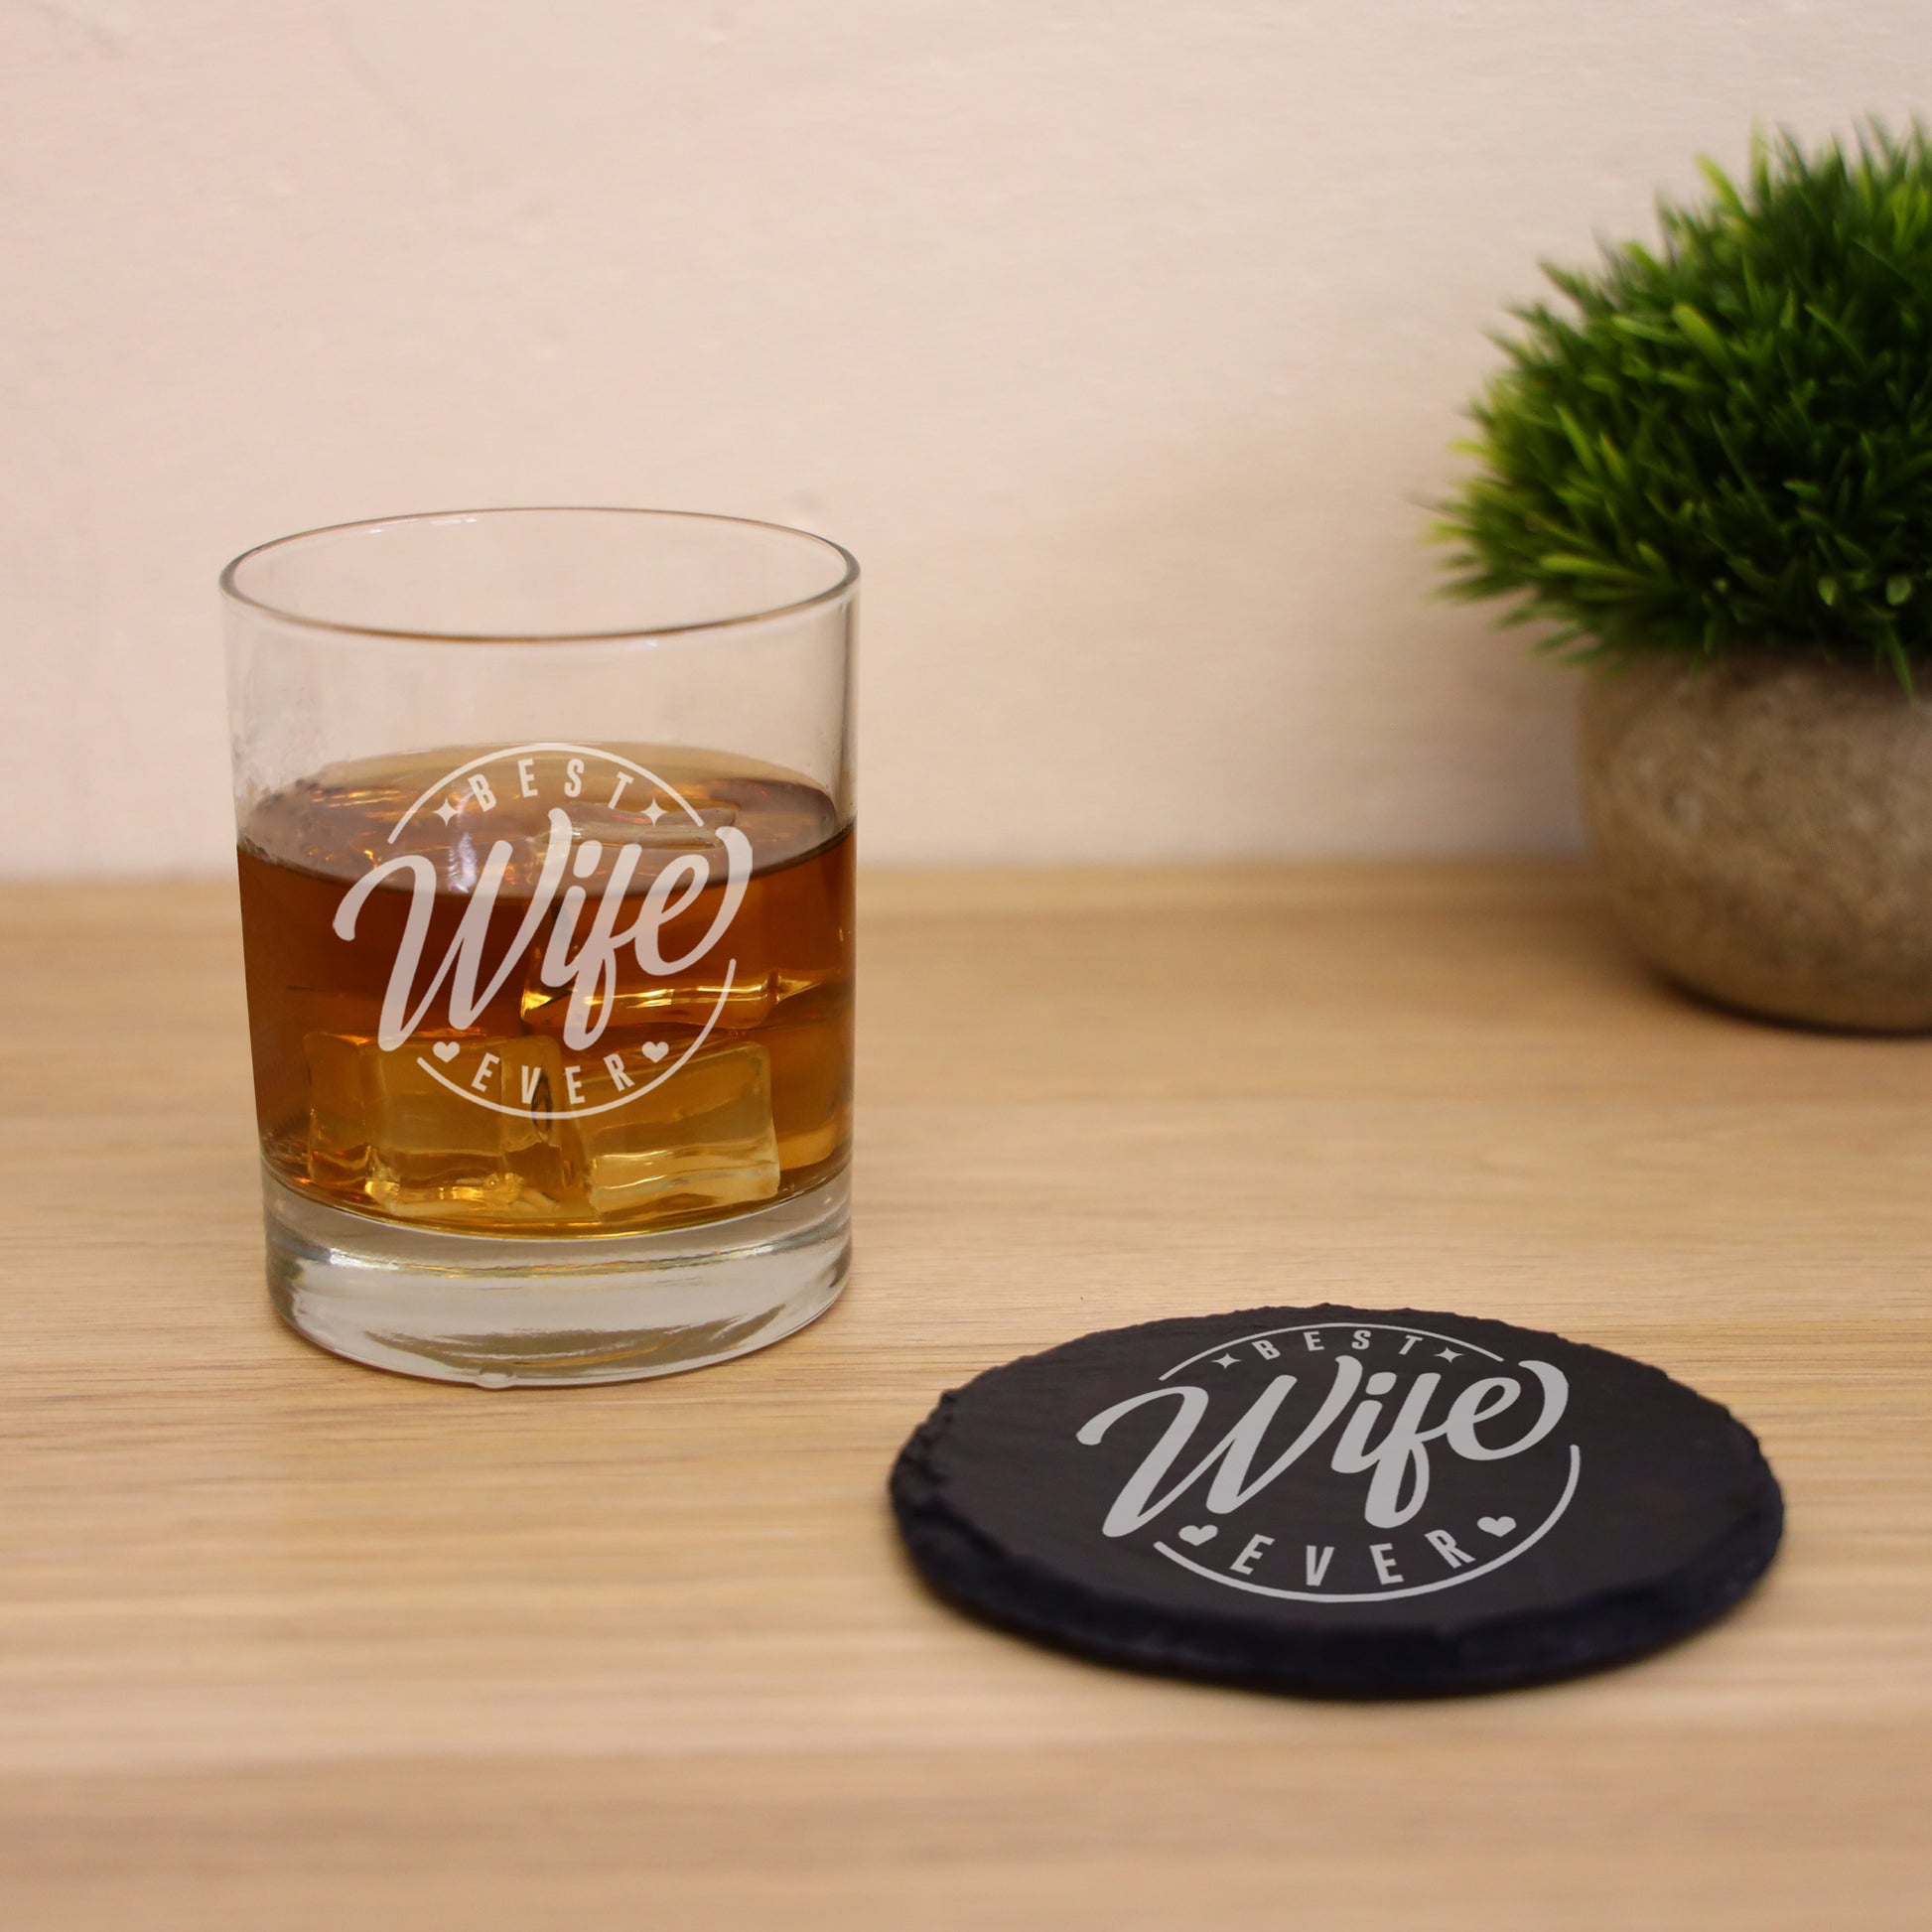 Best Wife Ever Engraved Whisky Glass and/or Coaster  - Always Looking Good -   